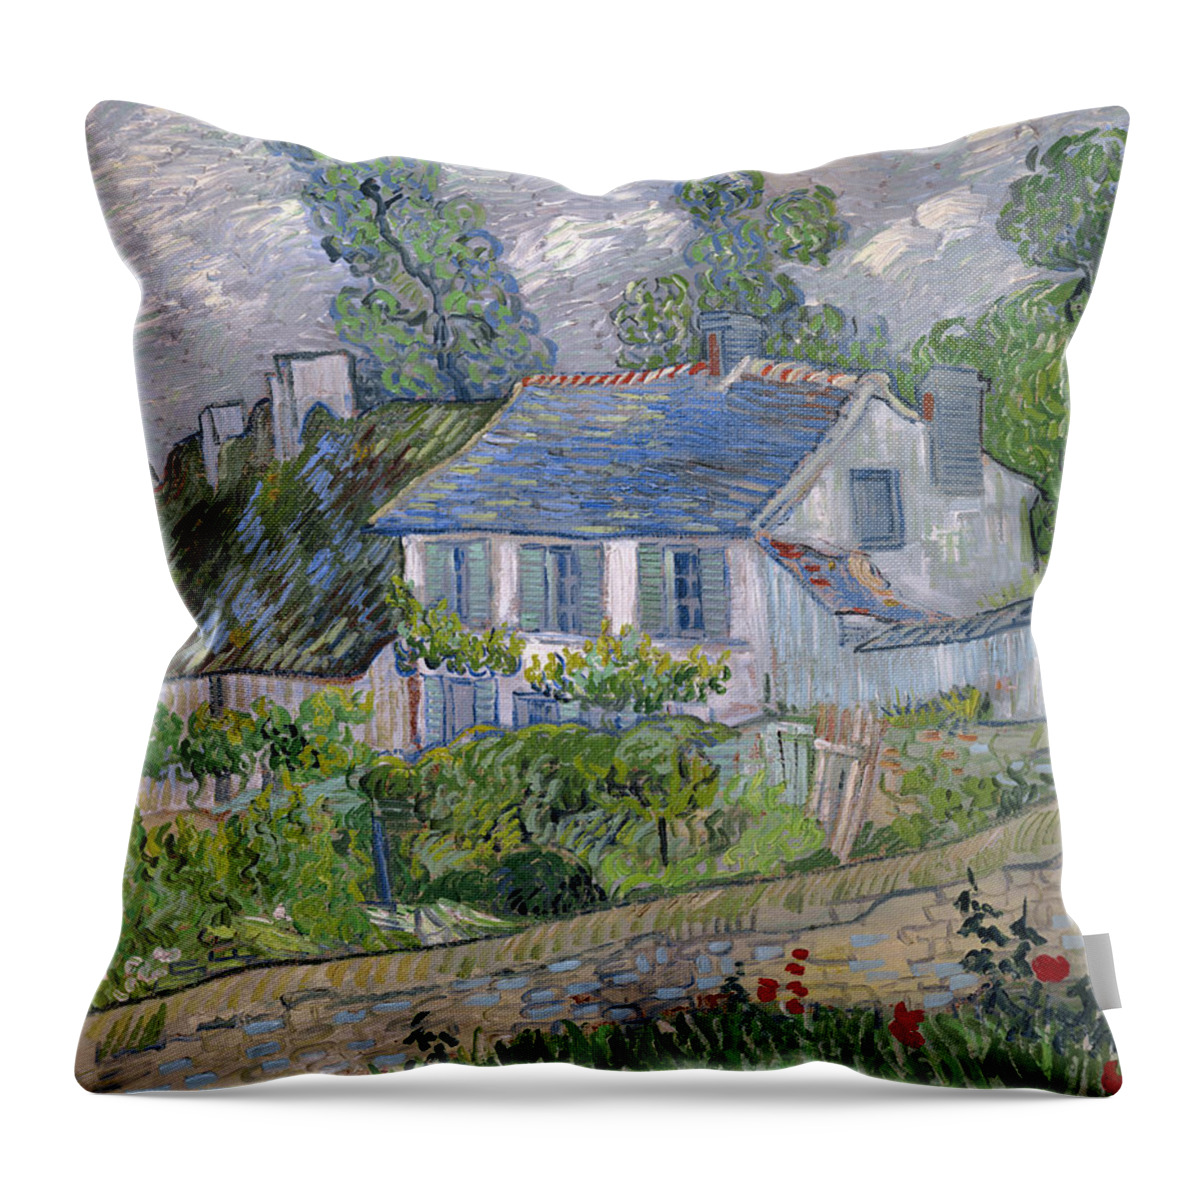 1890 Throw Pillow featuring the painting Van Gogh Houses At Auvers by Granger